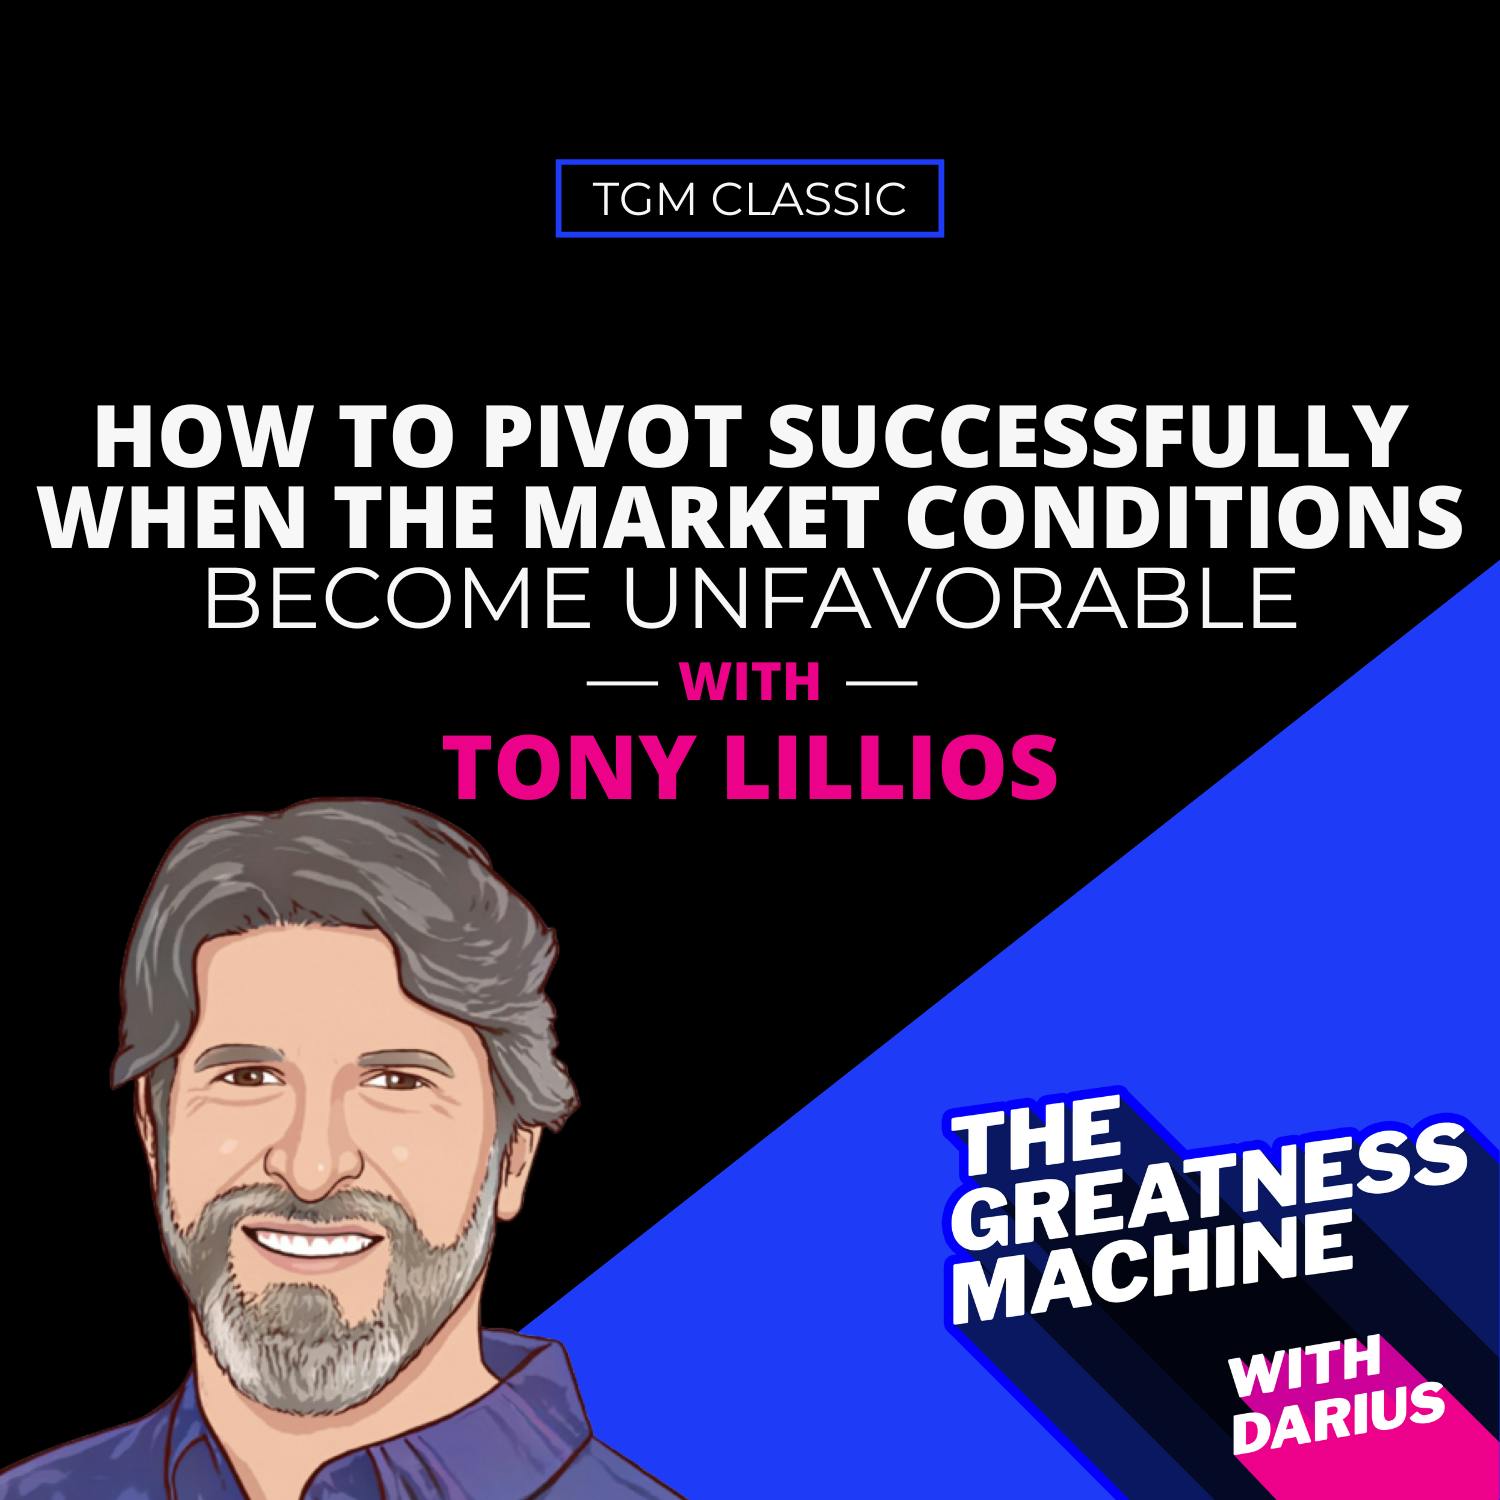 TGM Classic | Tony Lillios | How to Pivot Successfully When Market Conditions Become Unfavorable